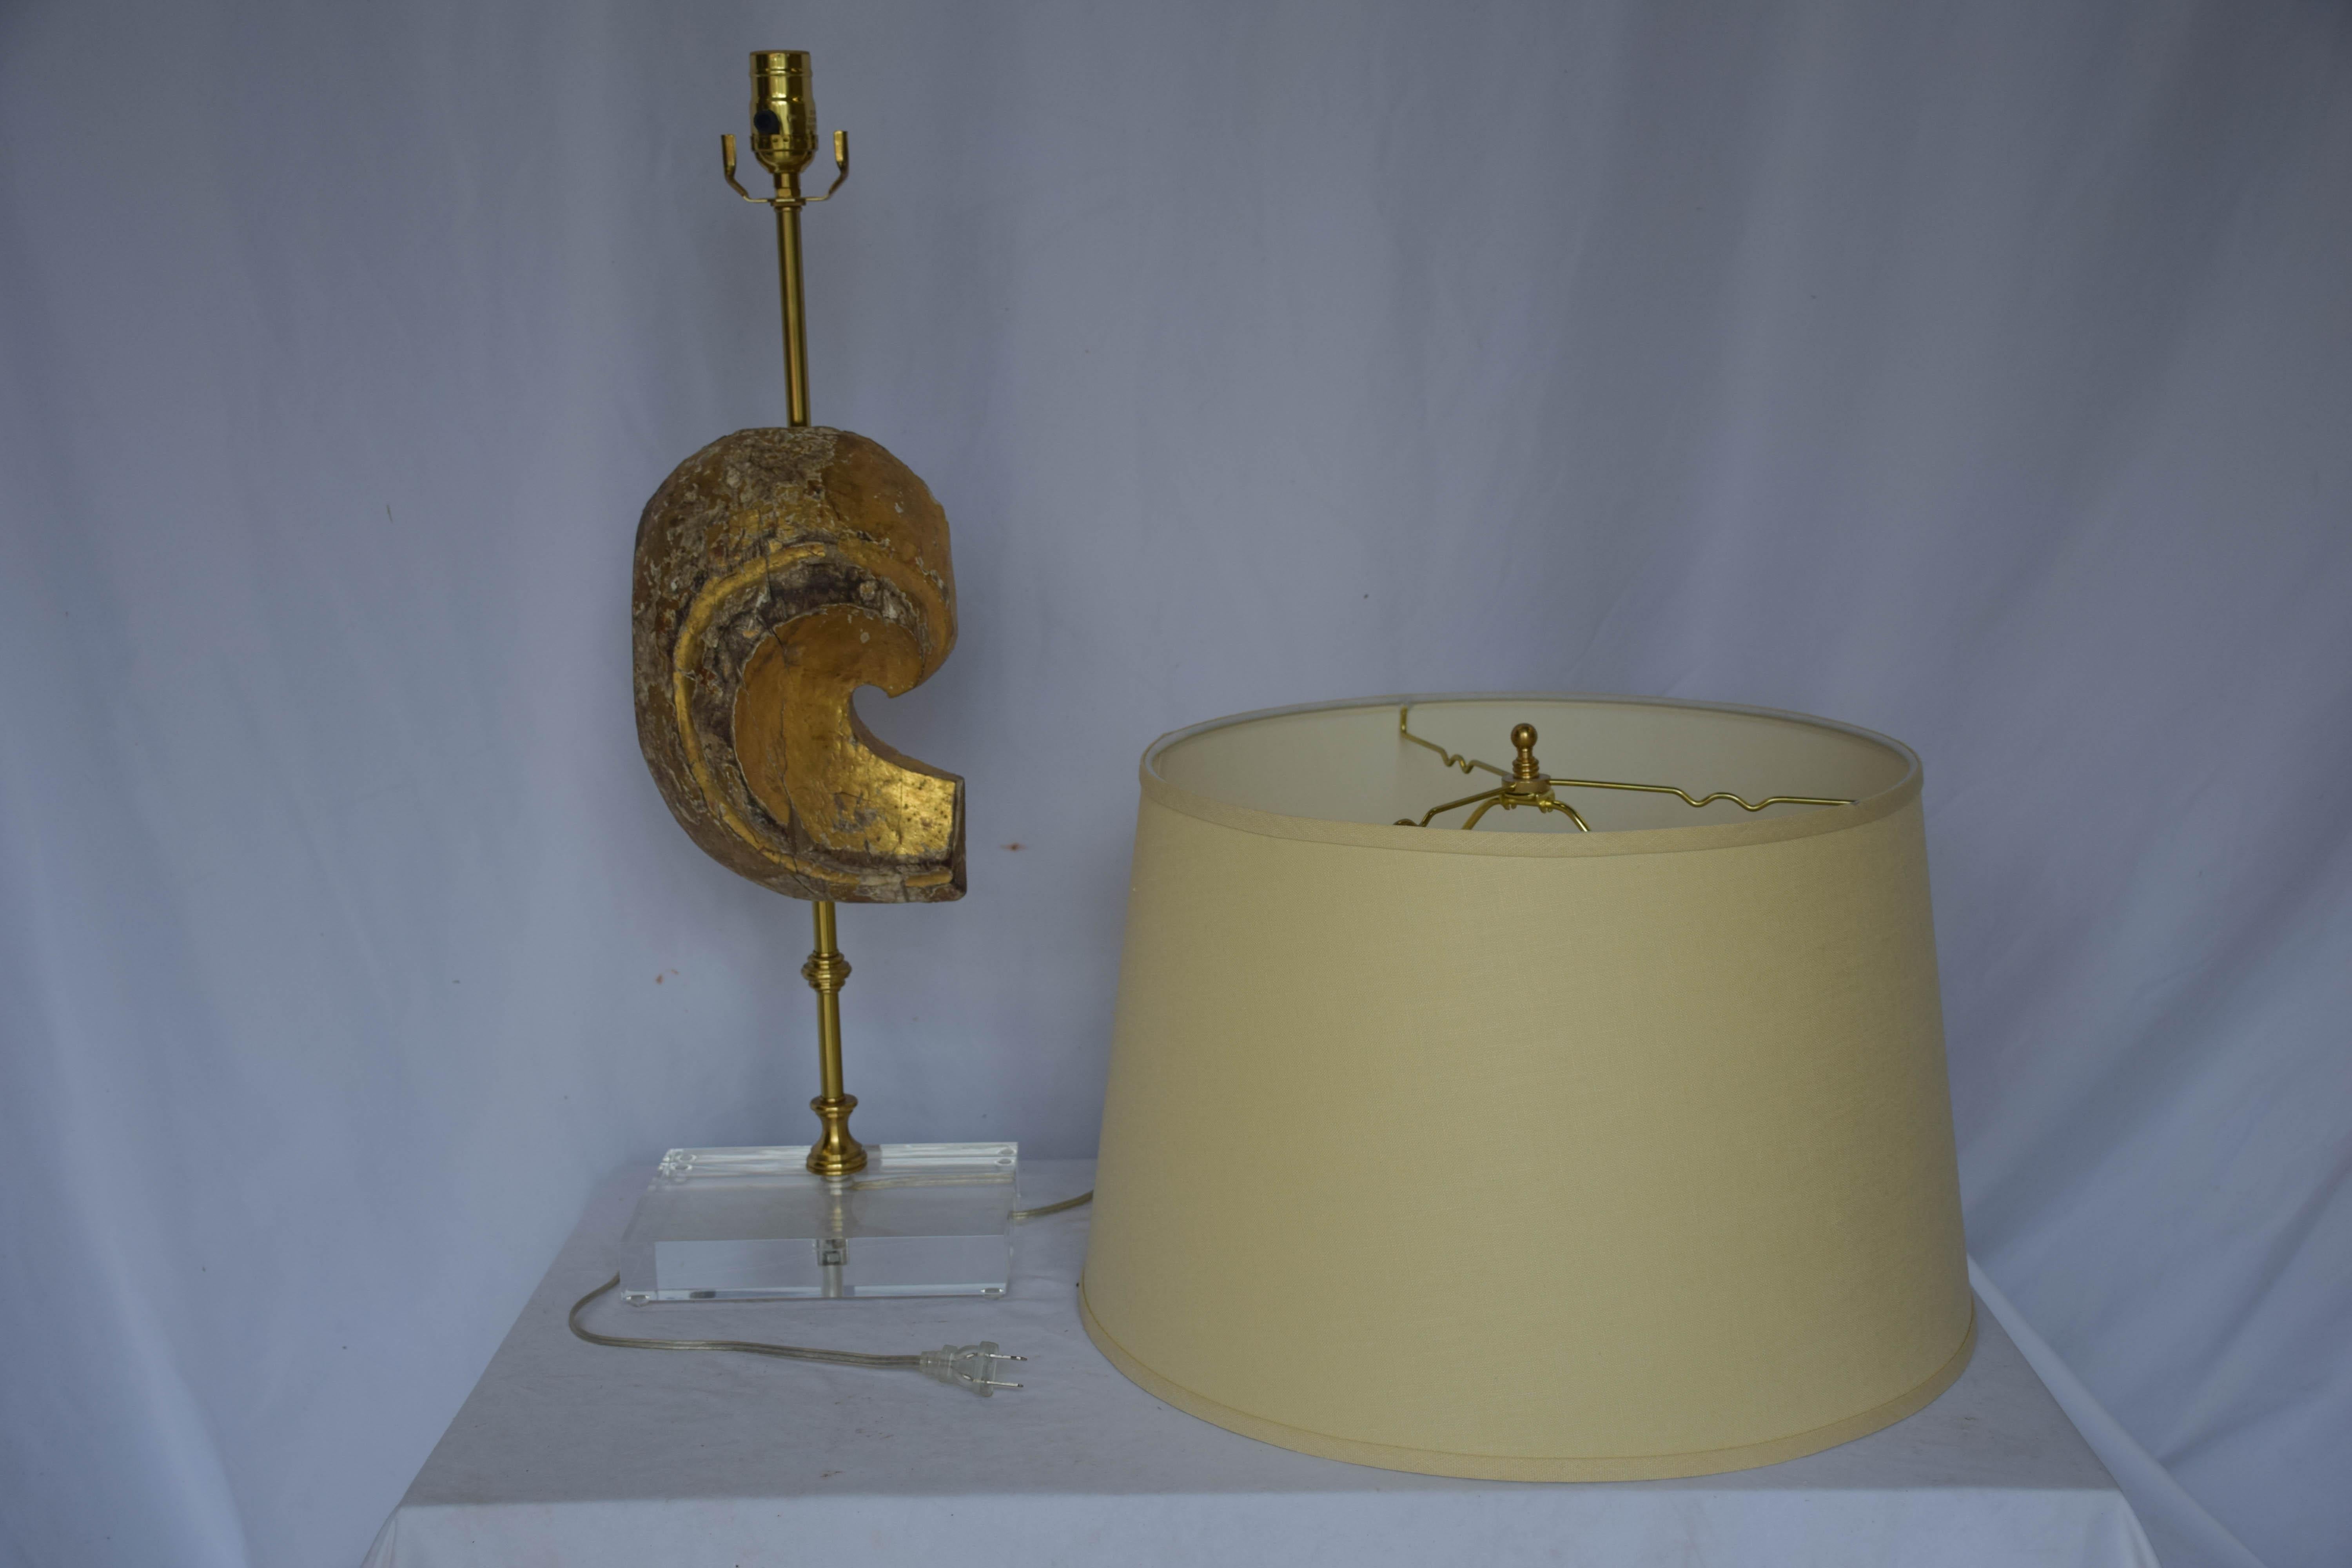 Architectural fragment lamp was found in France and rewired here in the US. One available.

Measures: Overall with shade: 18 